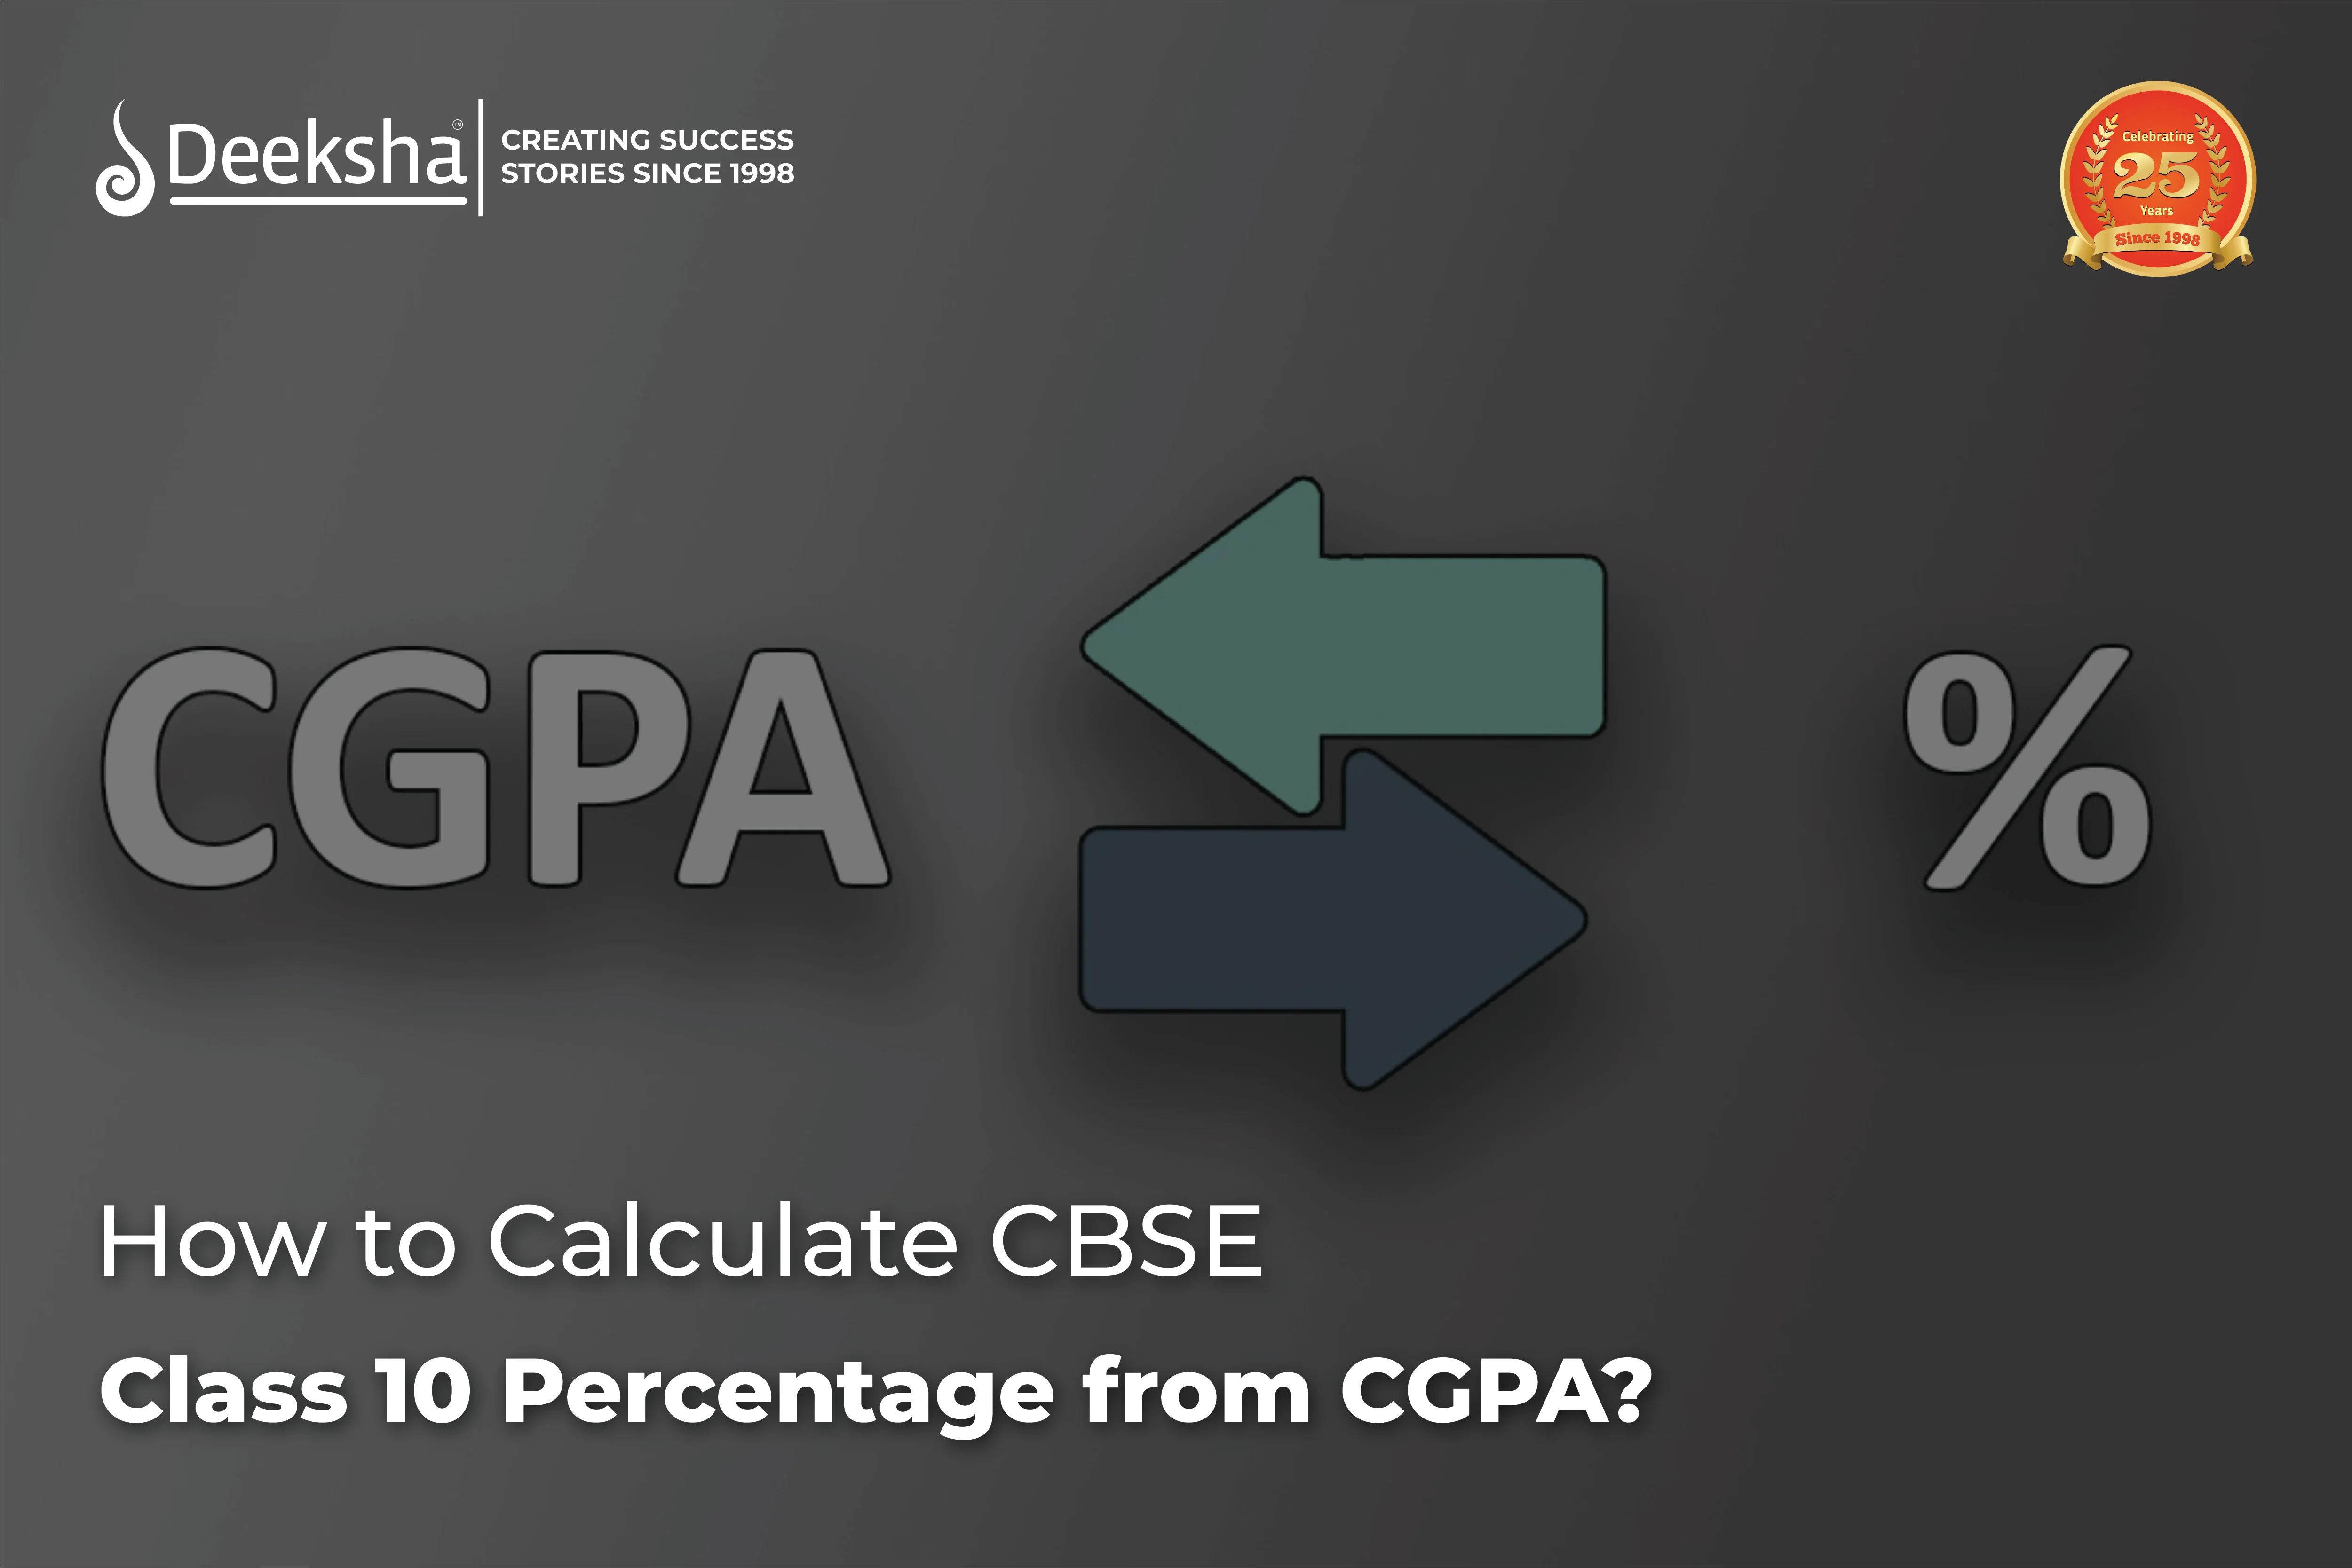 How to Calculate CBSE Class 10 Percentage from CGPA?